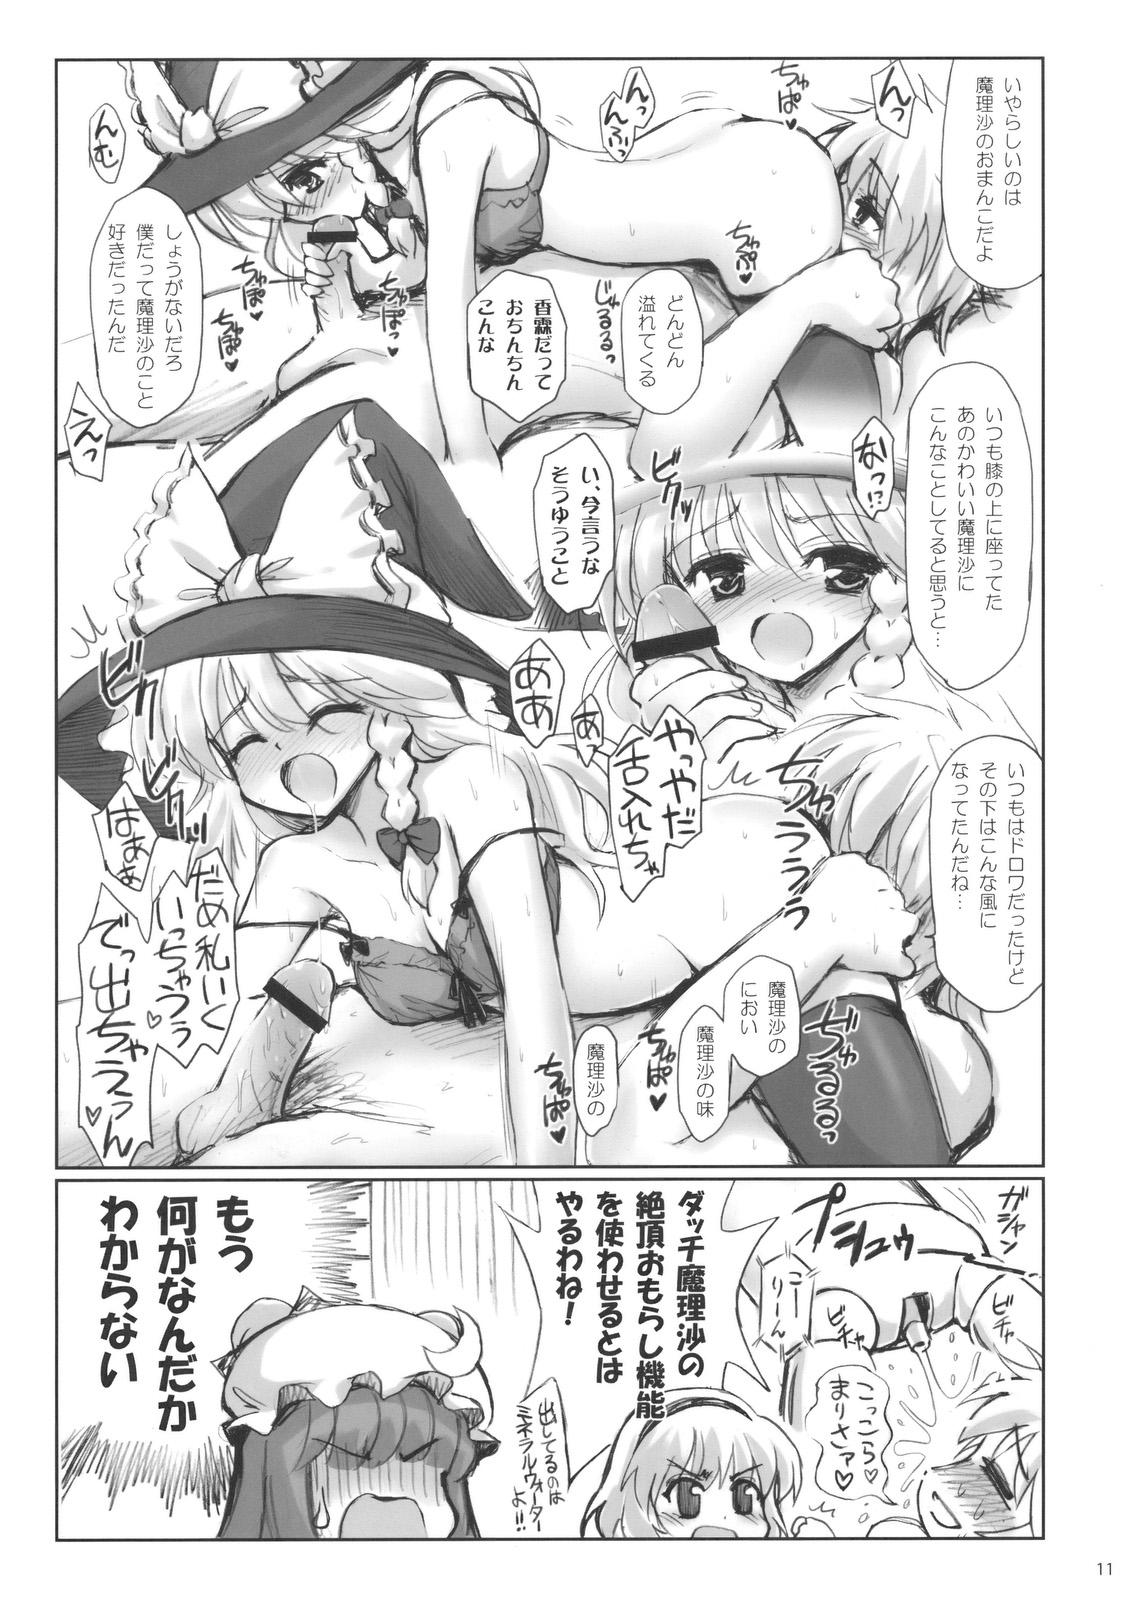 Novinha ALICE IN NIGHTMARE - Touhou project Reversecowgirl - Page 11